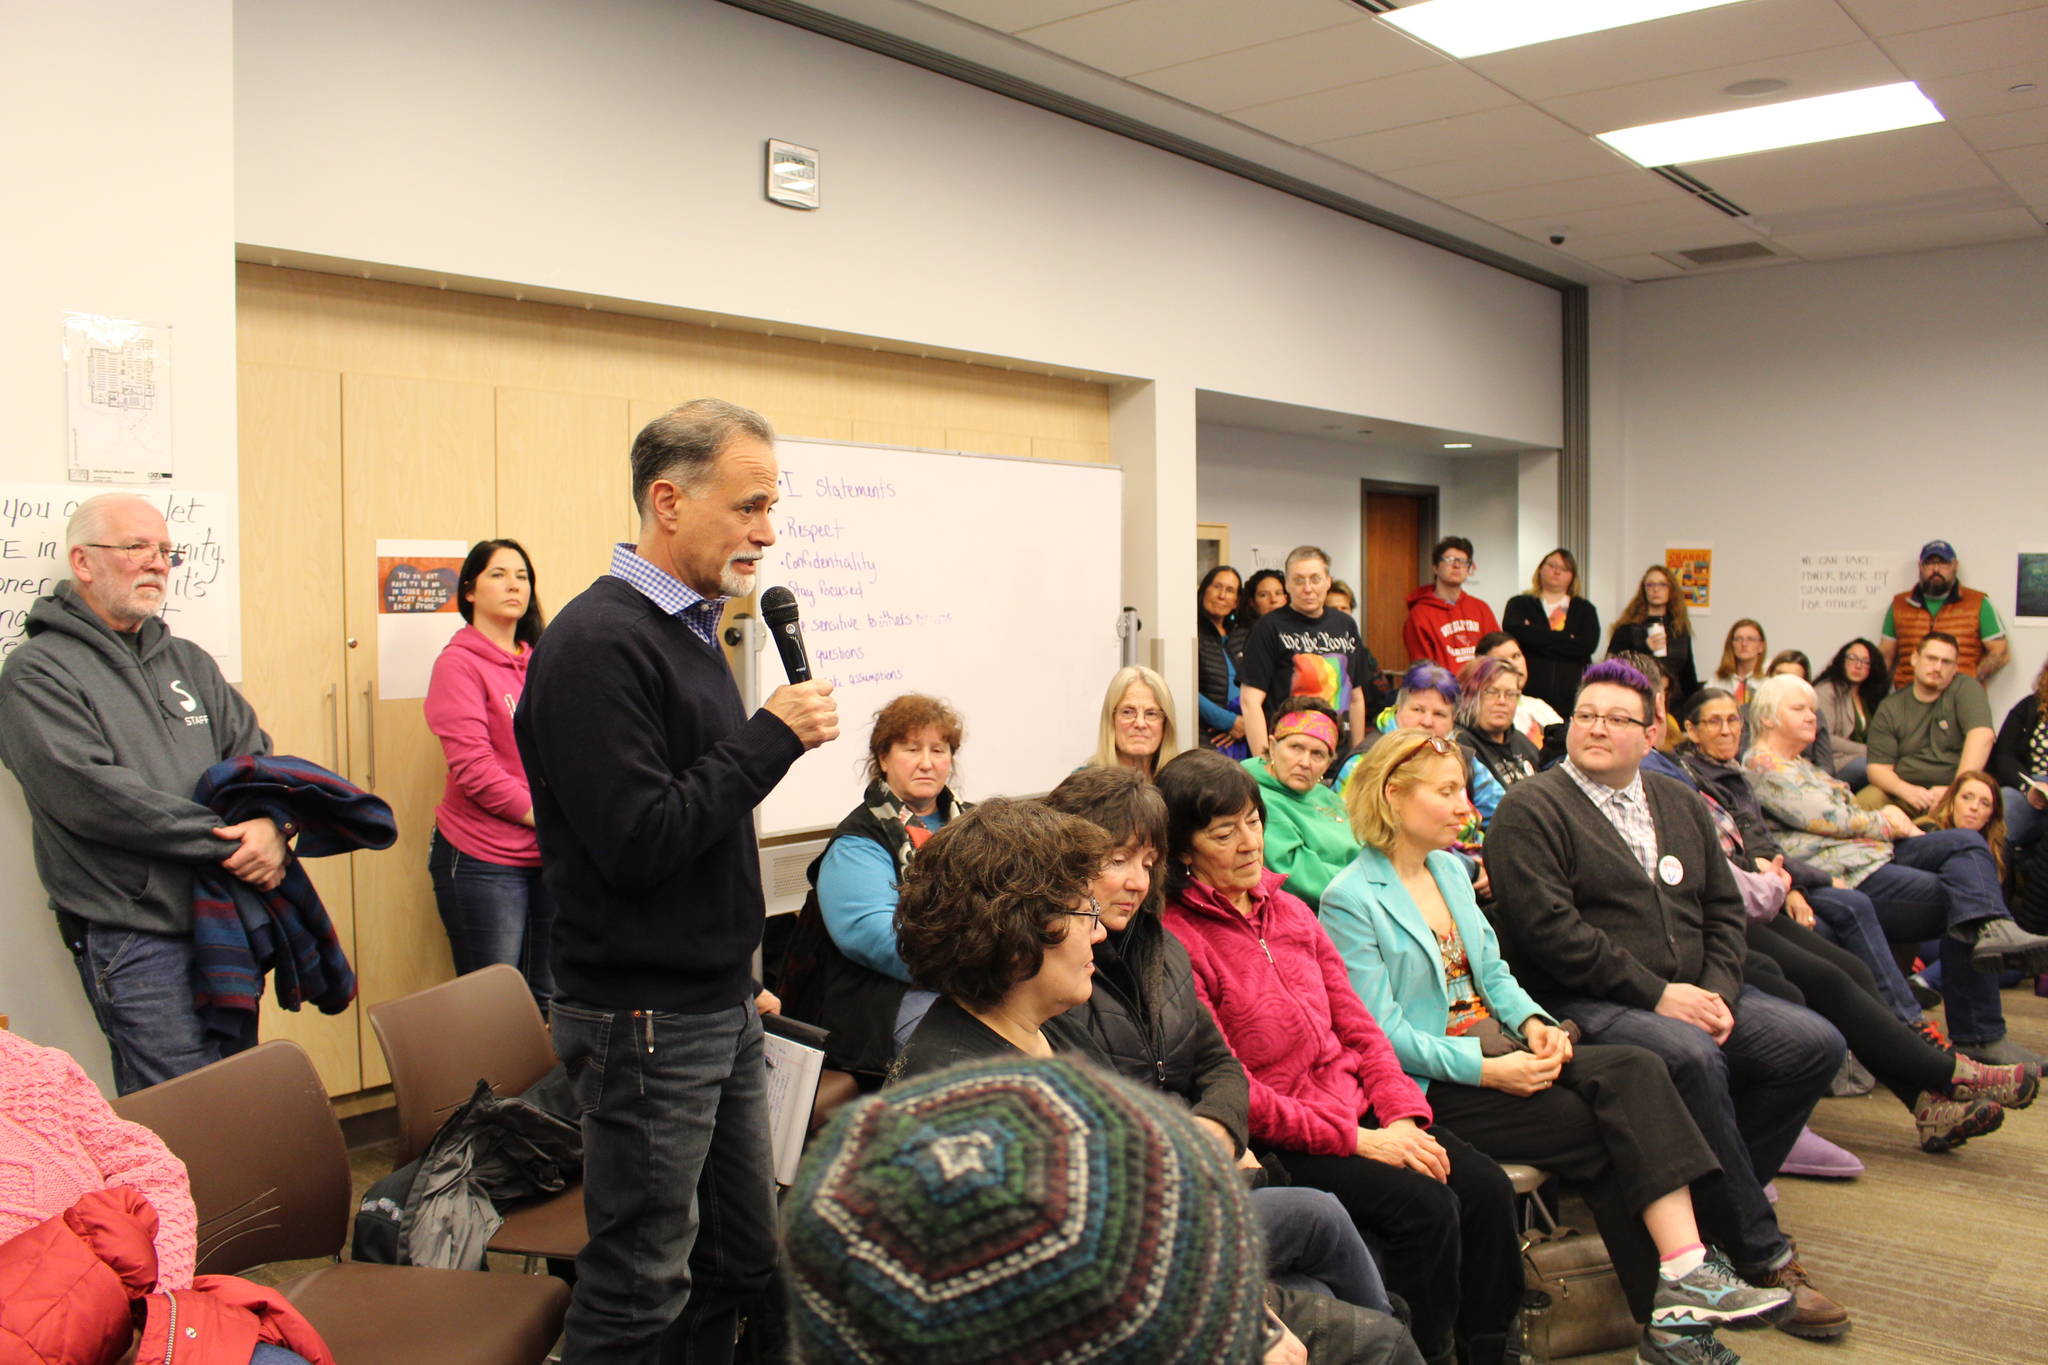 Sen. Peter Micciche, R-Soldotna, speaks at the LGBTQ Town Hall at the Soldotna Public Library in Soldotna, Alaska on Jan. 4, 2020. (Photo by Brian Mazurek/Peninsula Clarion)